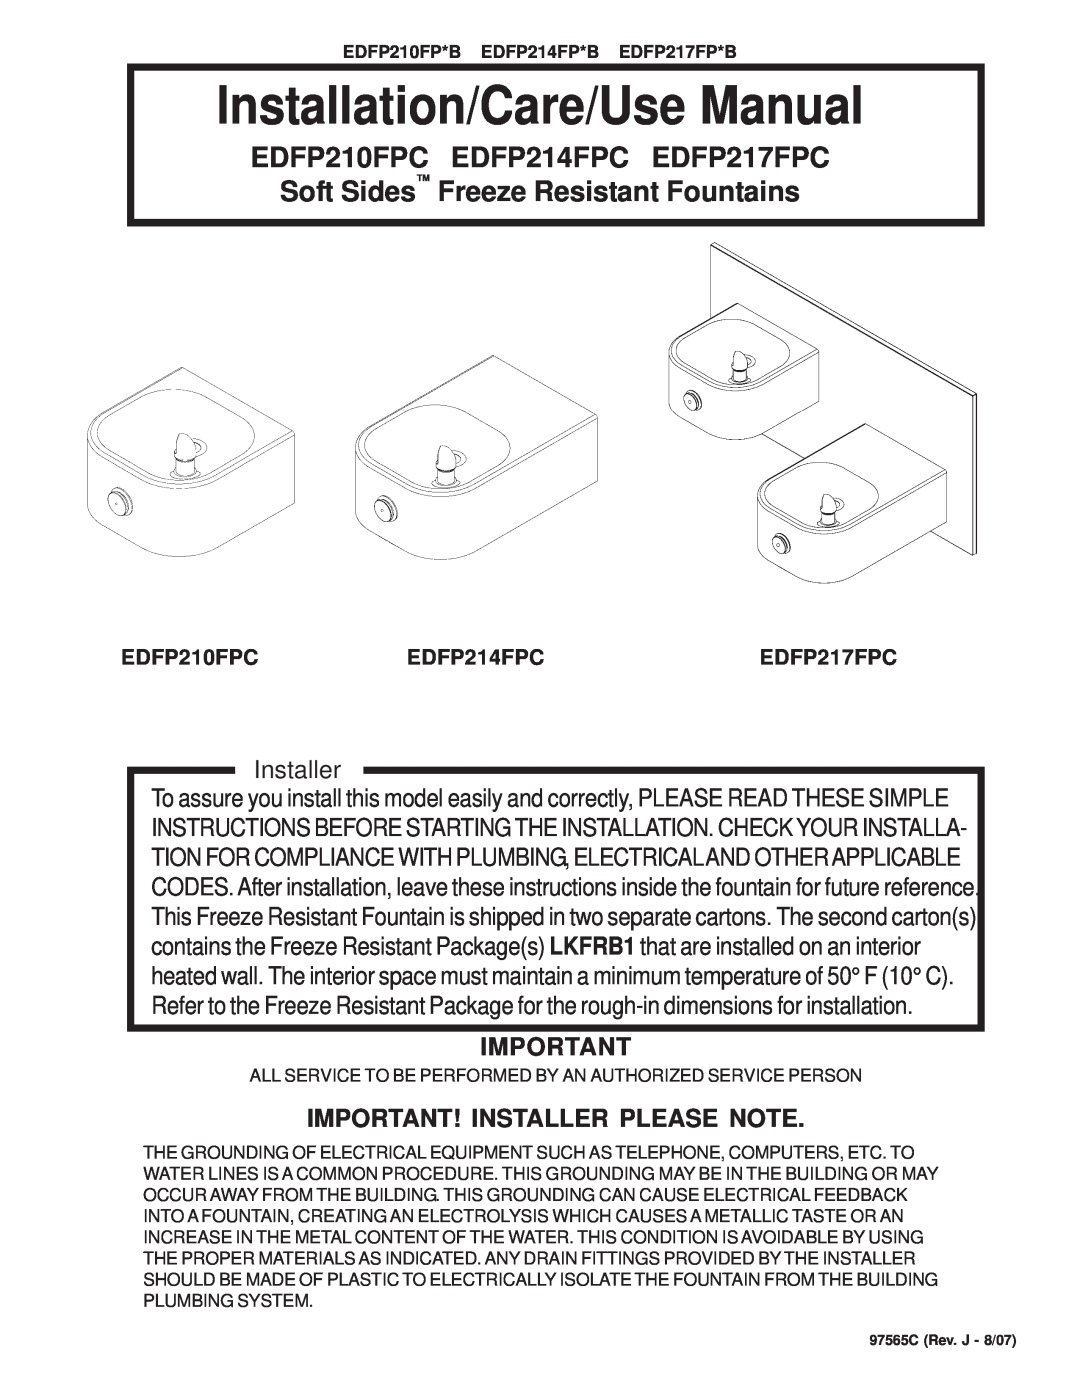 Elkay EDFP214FPC dimensions Important! Installer Please Note, EDFP210FPC, EDFP217FPC, Installation/Care/Use Manual 